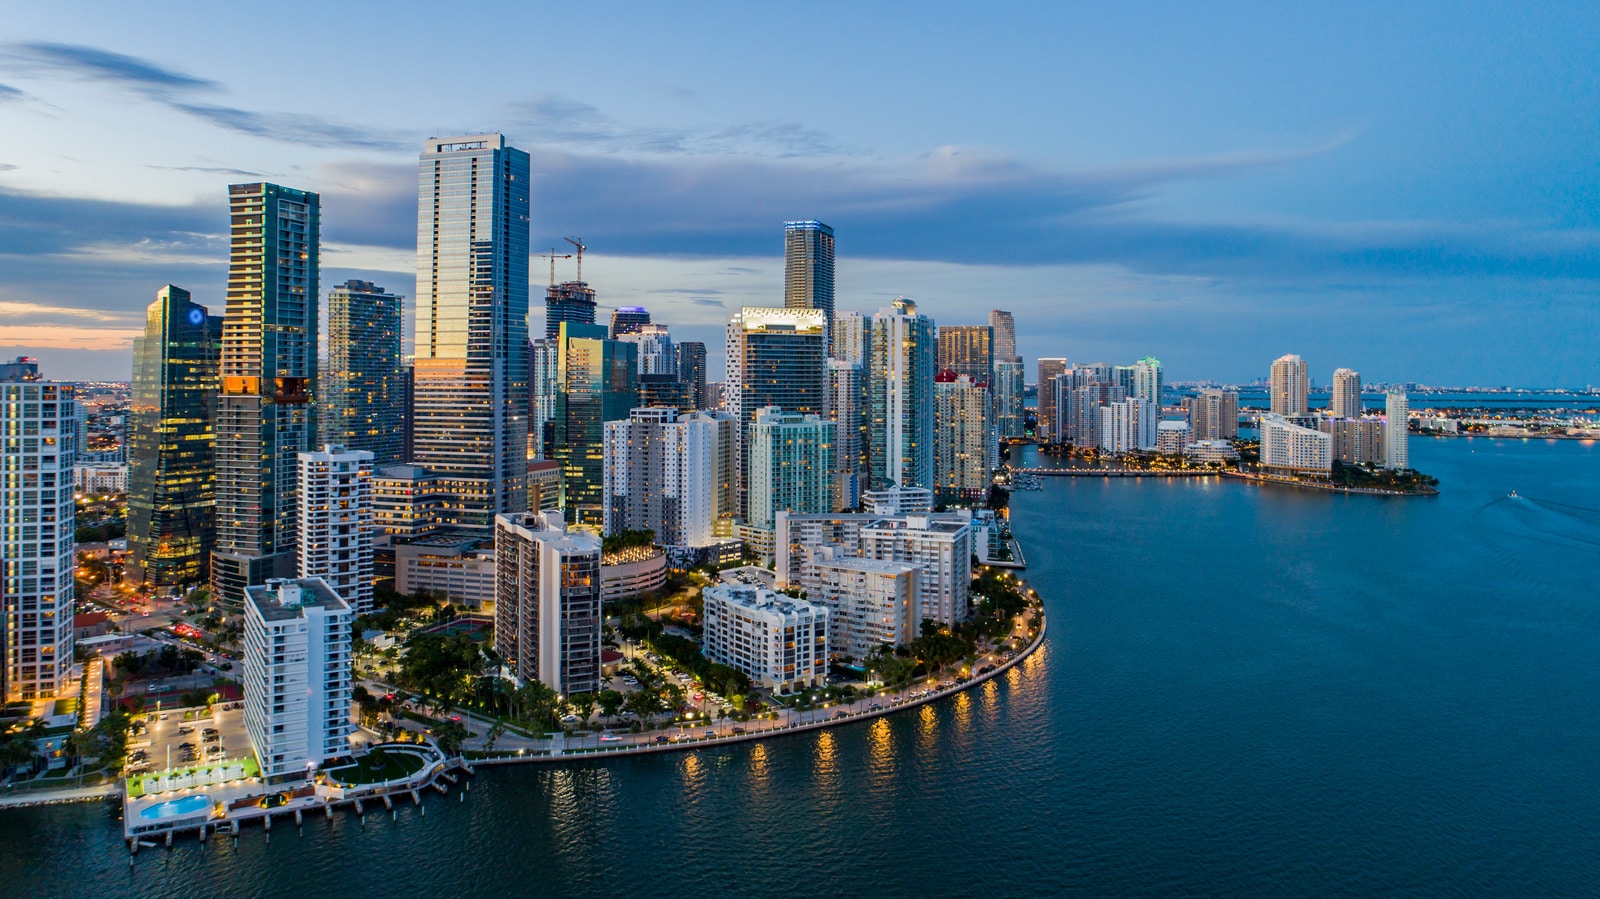 Downtown Miami aerial view of skyscrapers